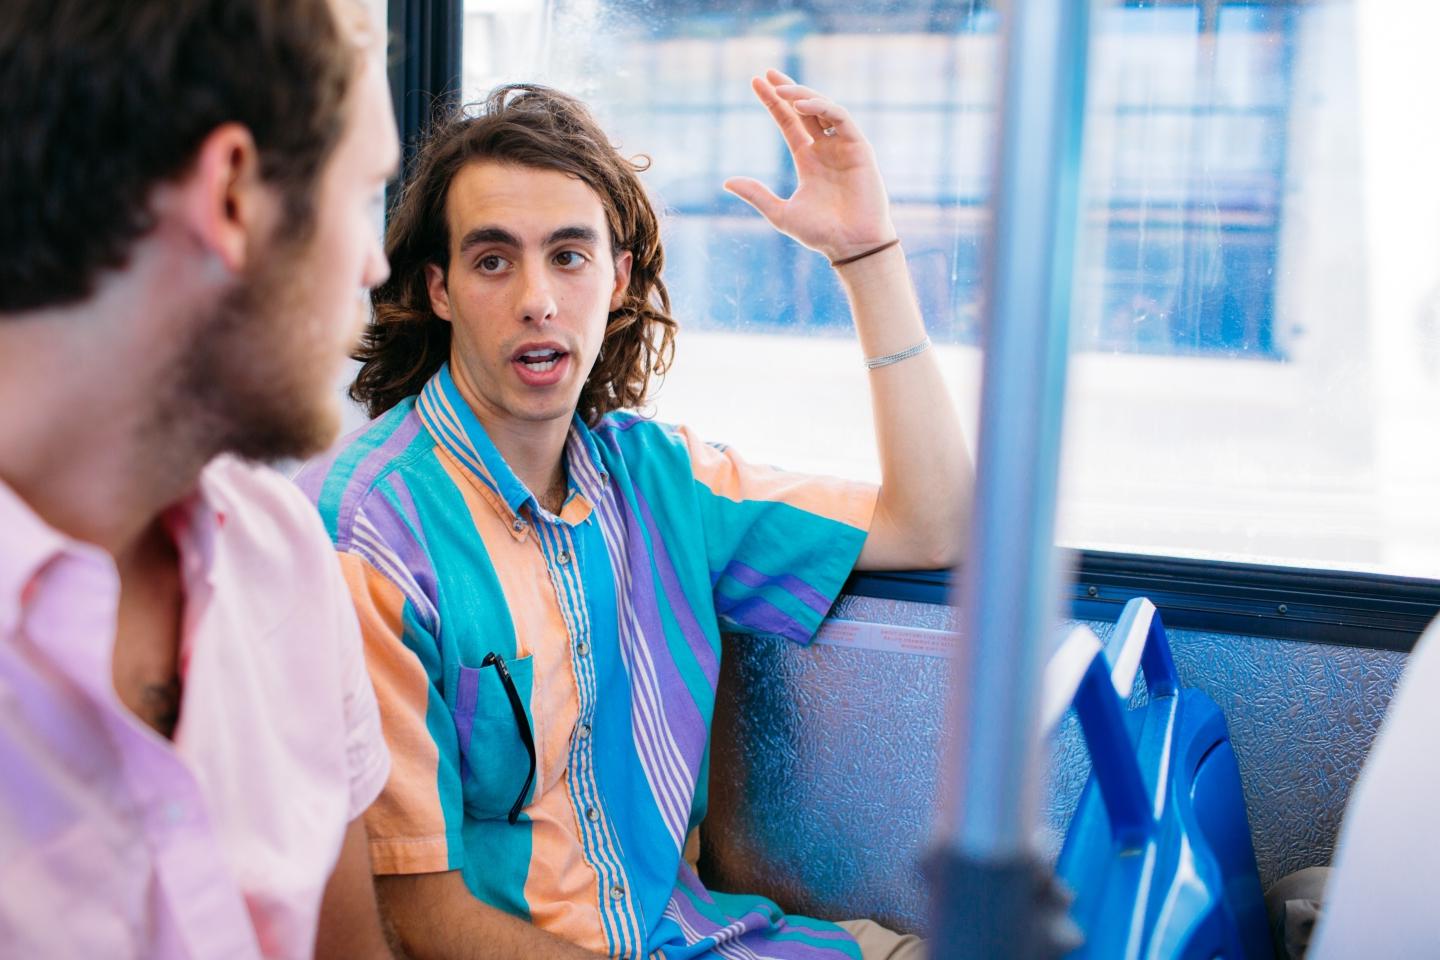 Two students talking on a bus